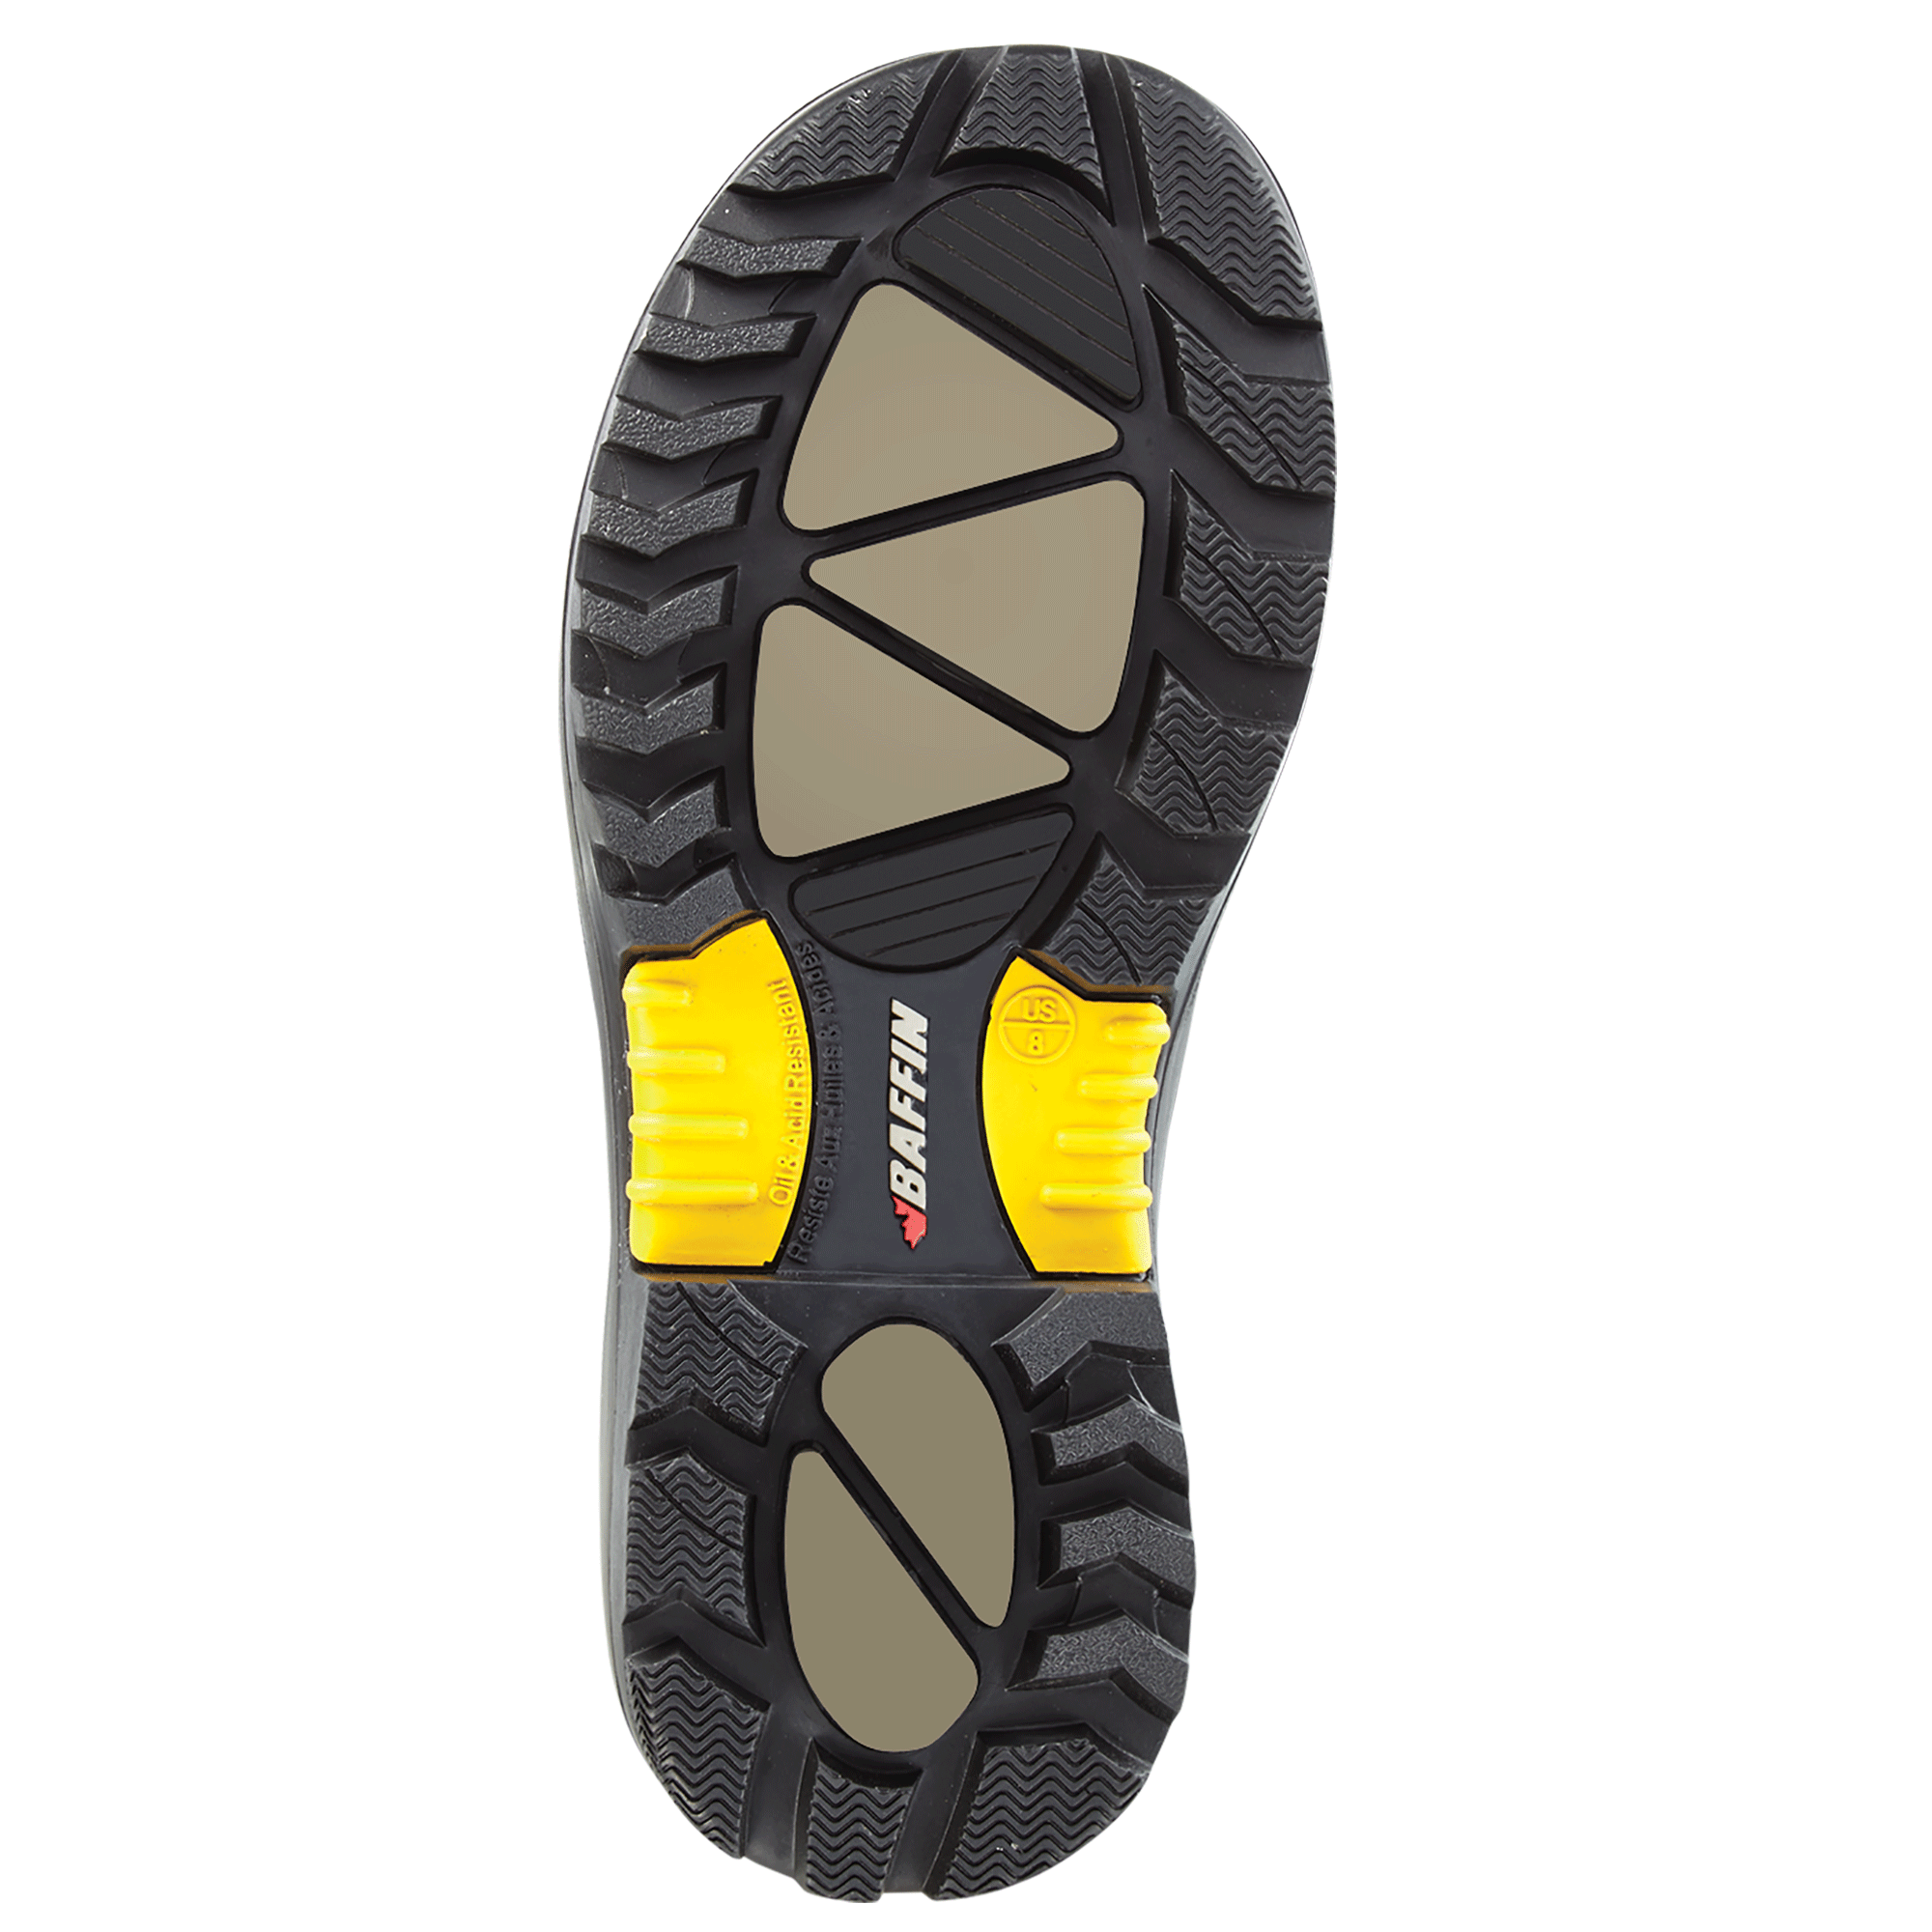 PREMIUM WORKER 8" (Safety Toe & Plate)